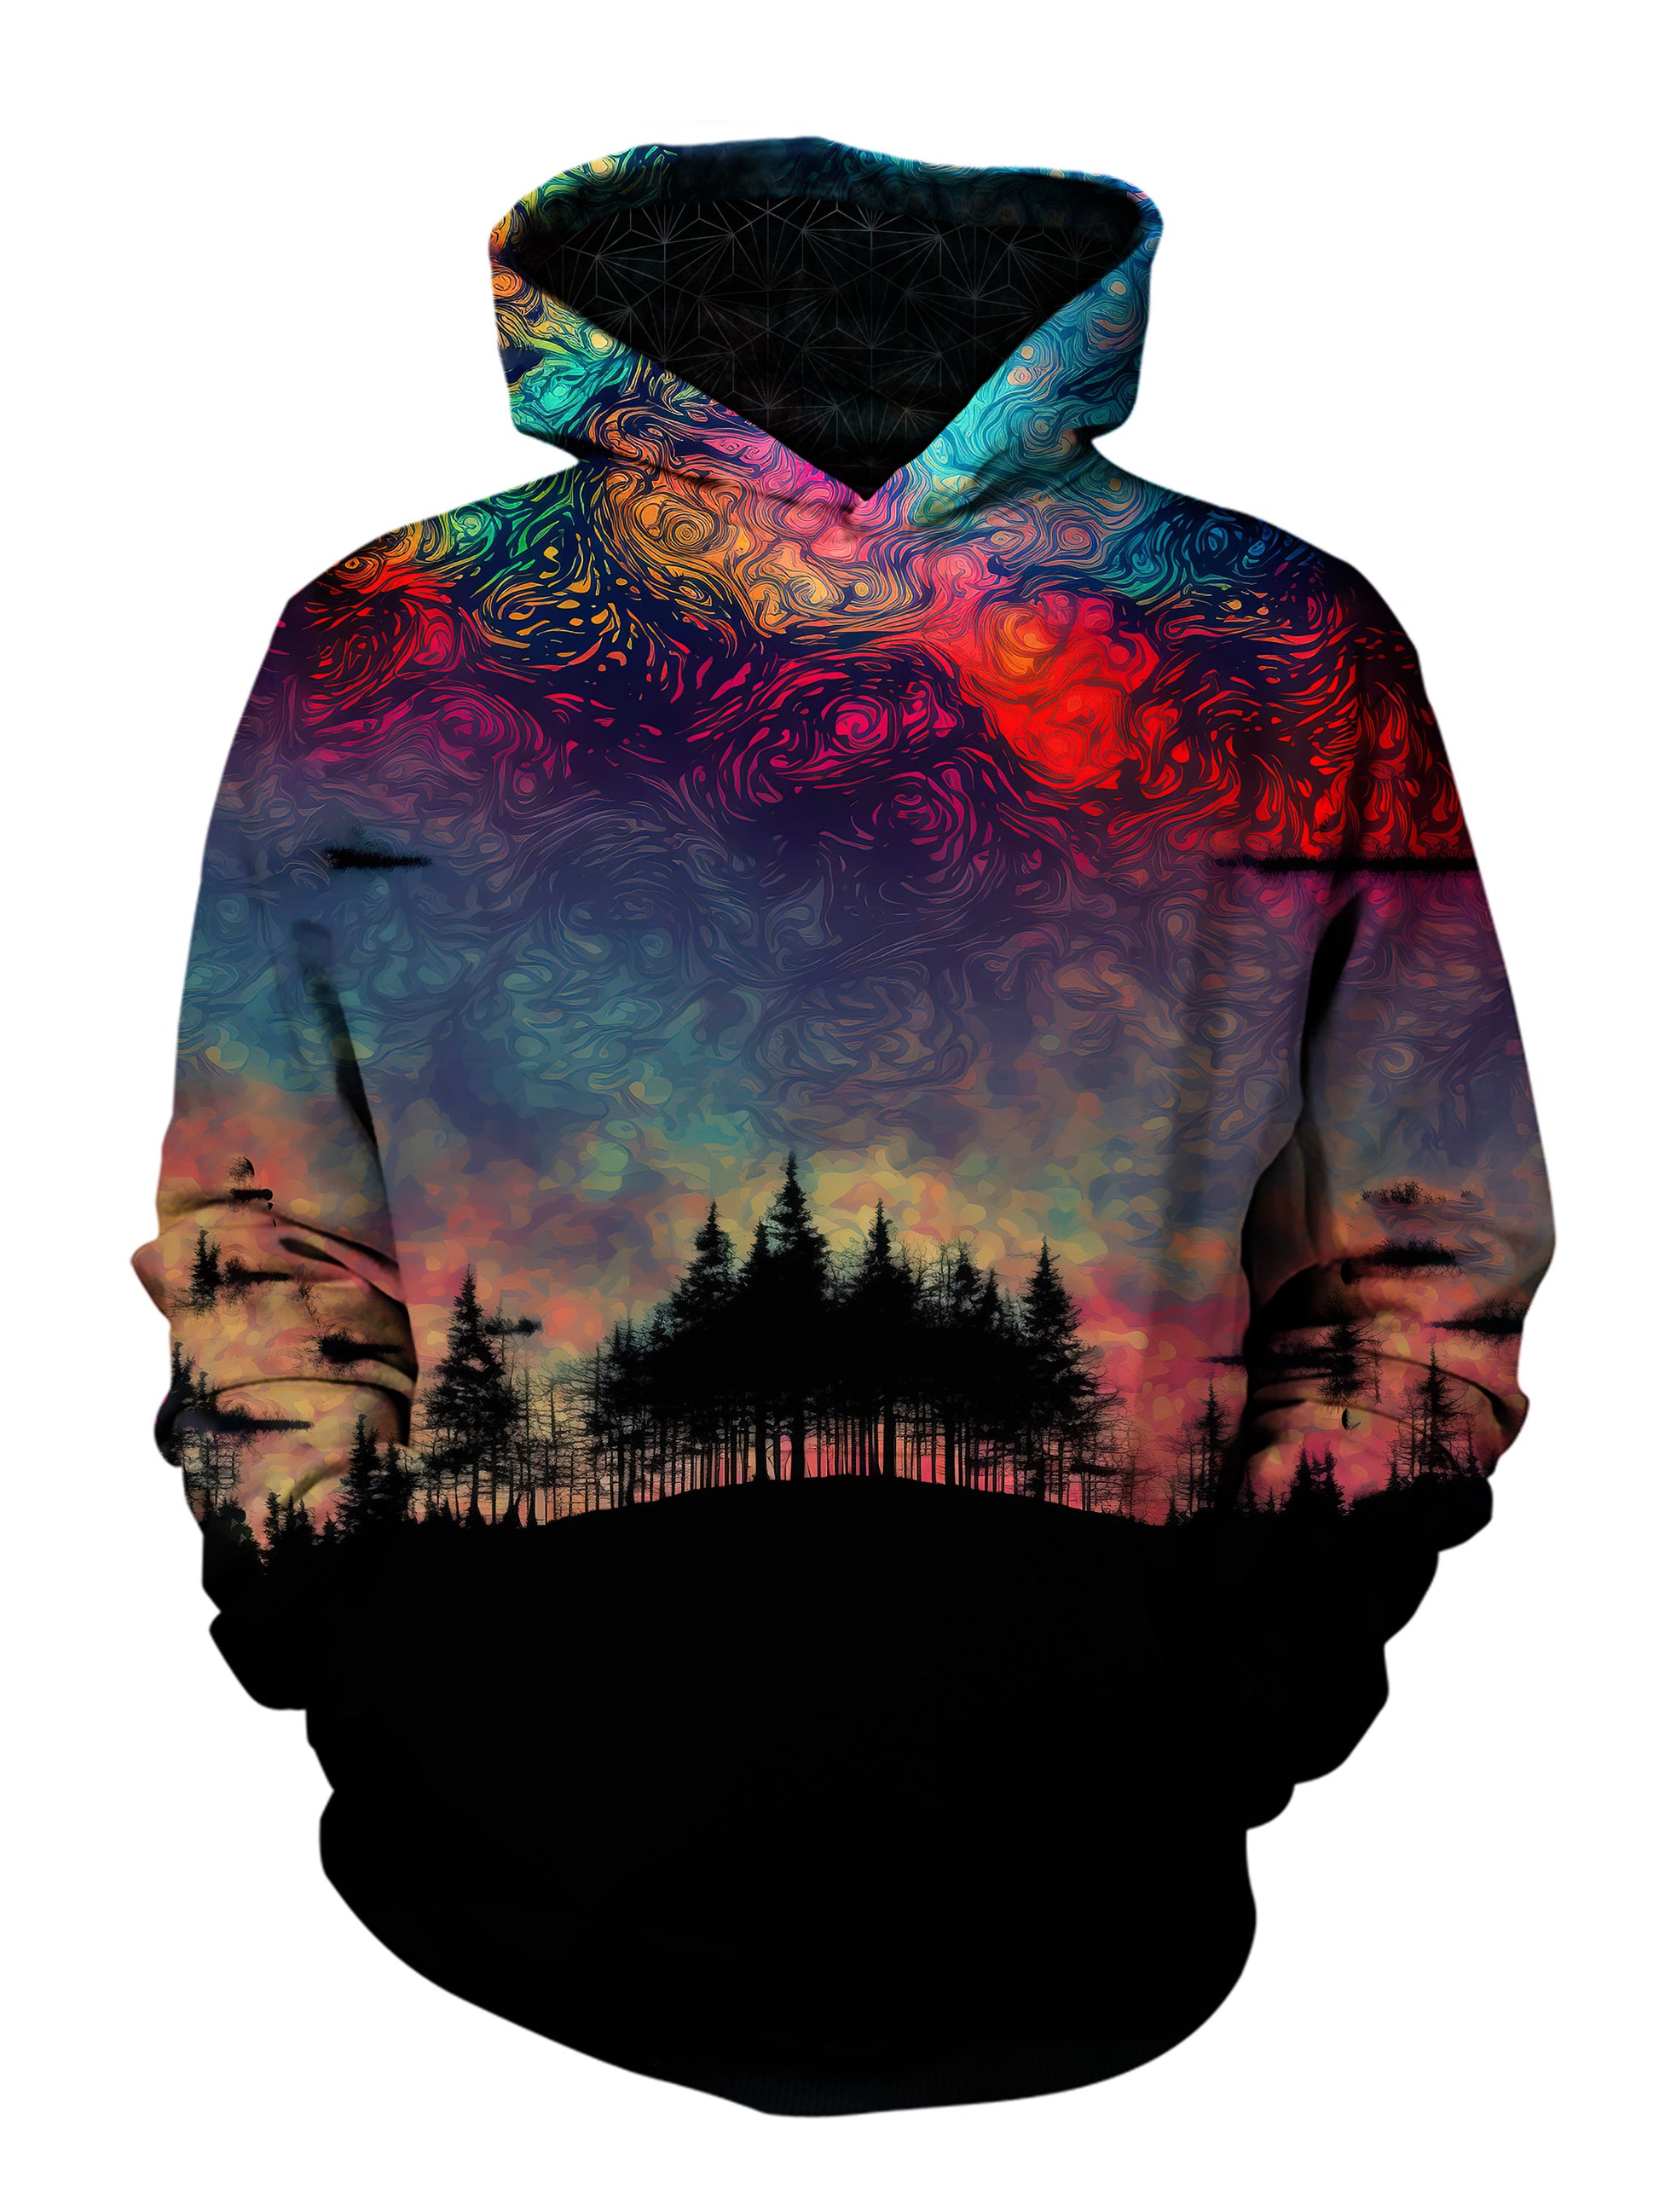 Stay comfortable and stylish no matter where the night takes you with this hoodie